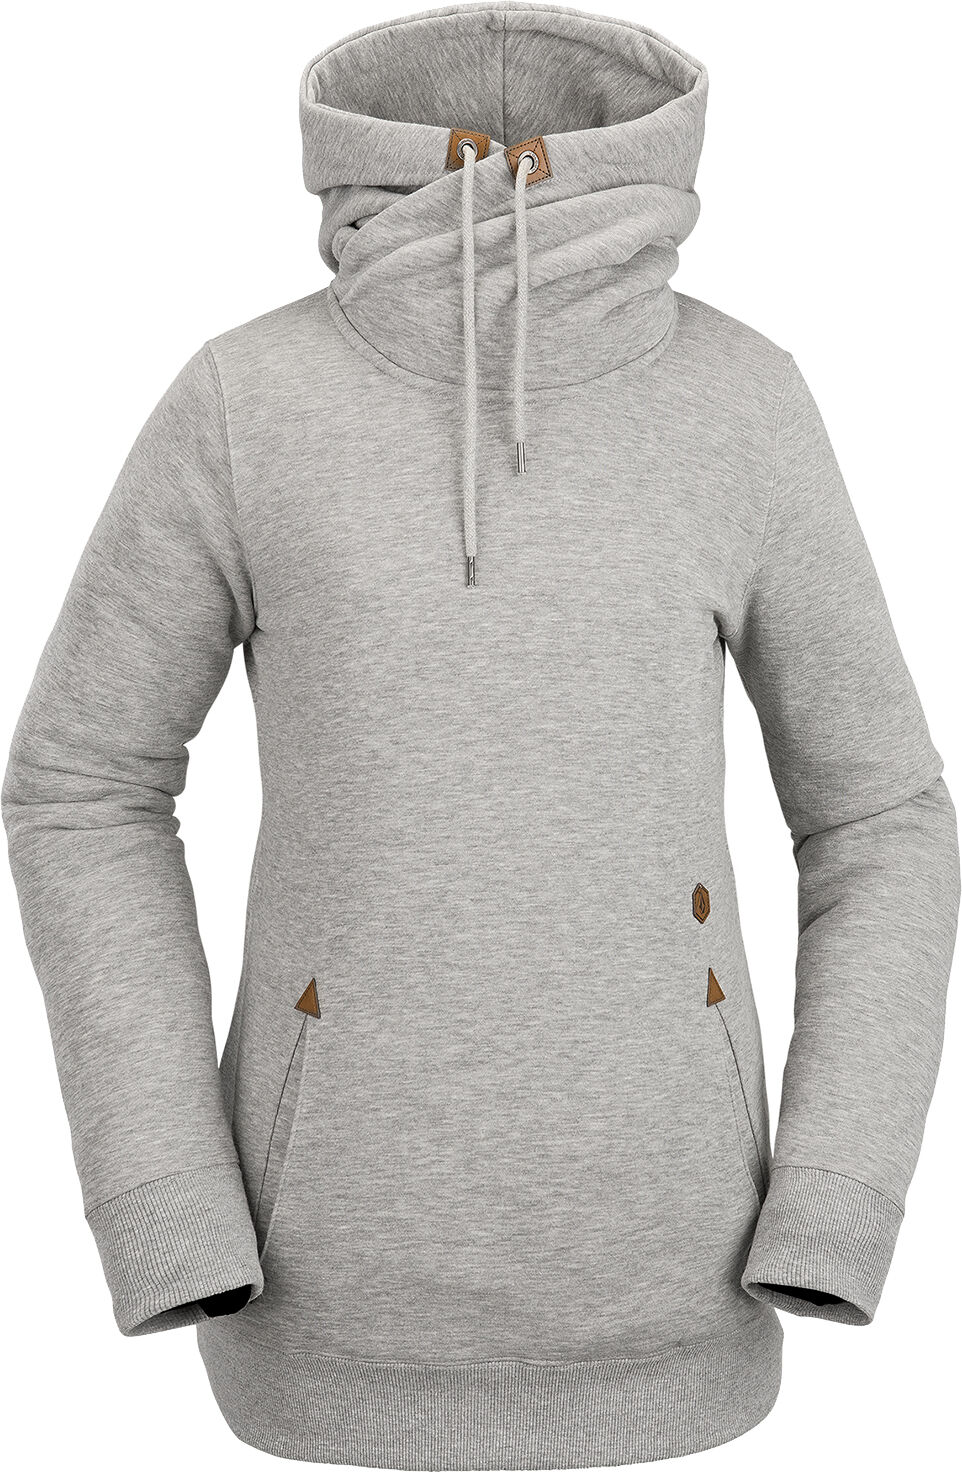 Volcom TOWER PULLOVER HEATHER GREY L